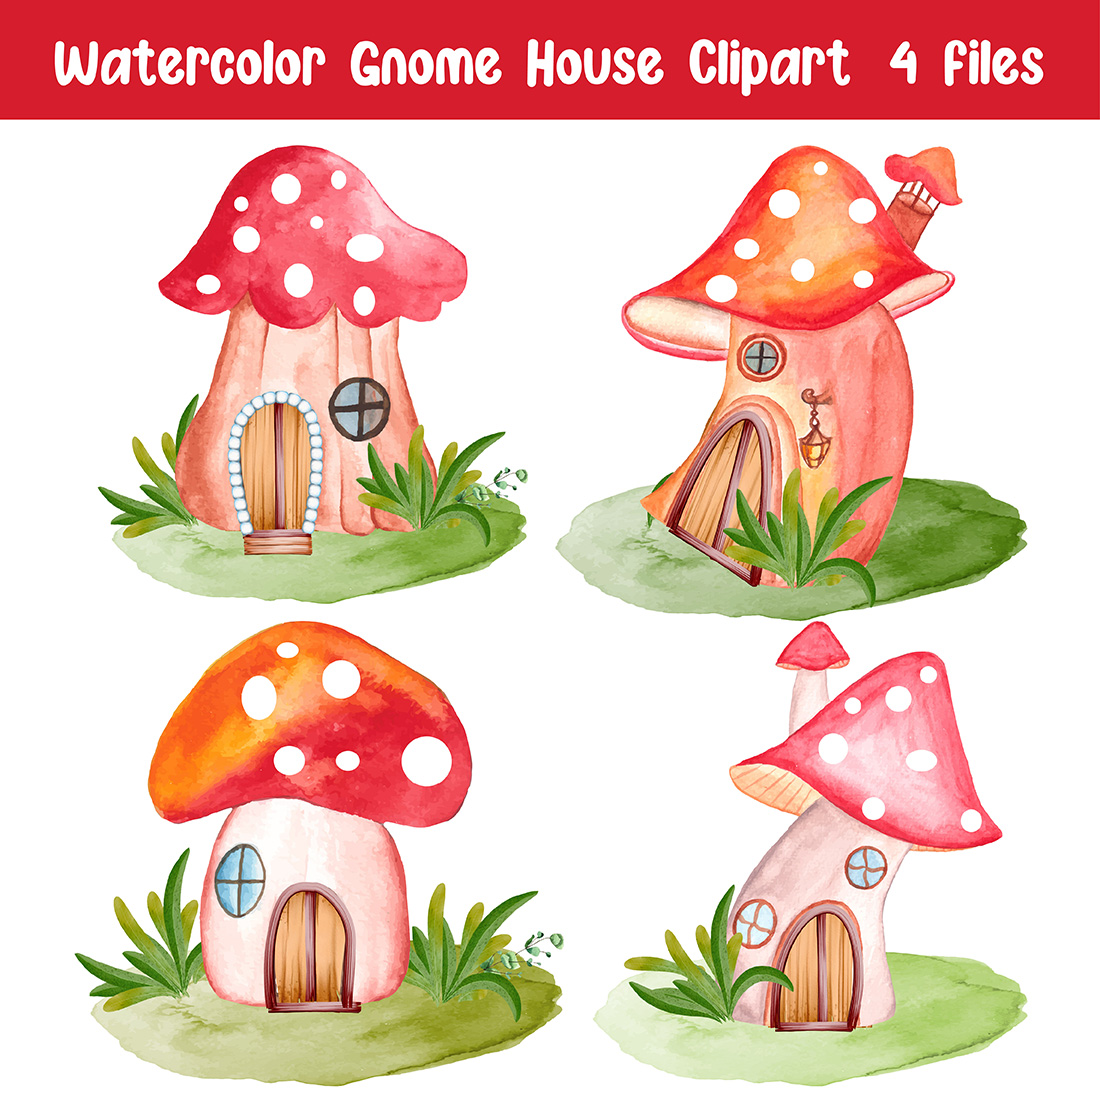 Pack of gorgeous watercolor images of gnome houses